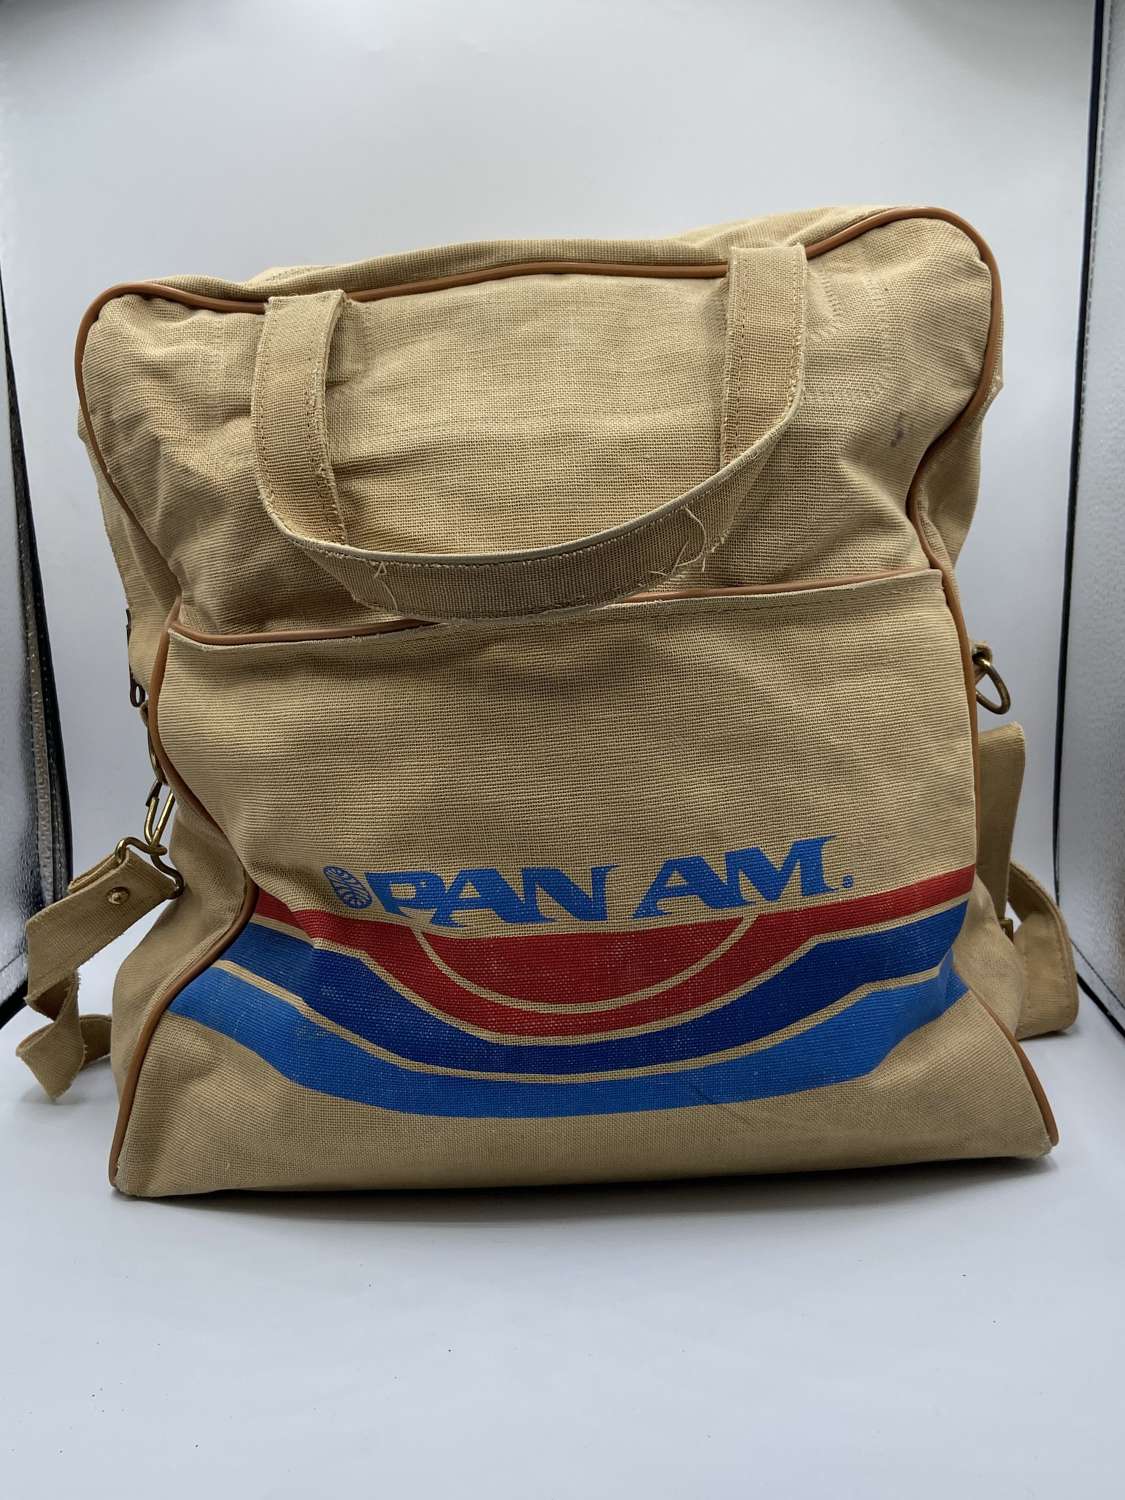 Vintage 1970s Pan Am Airlines Employees Canvas Bag NY Made